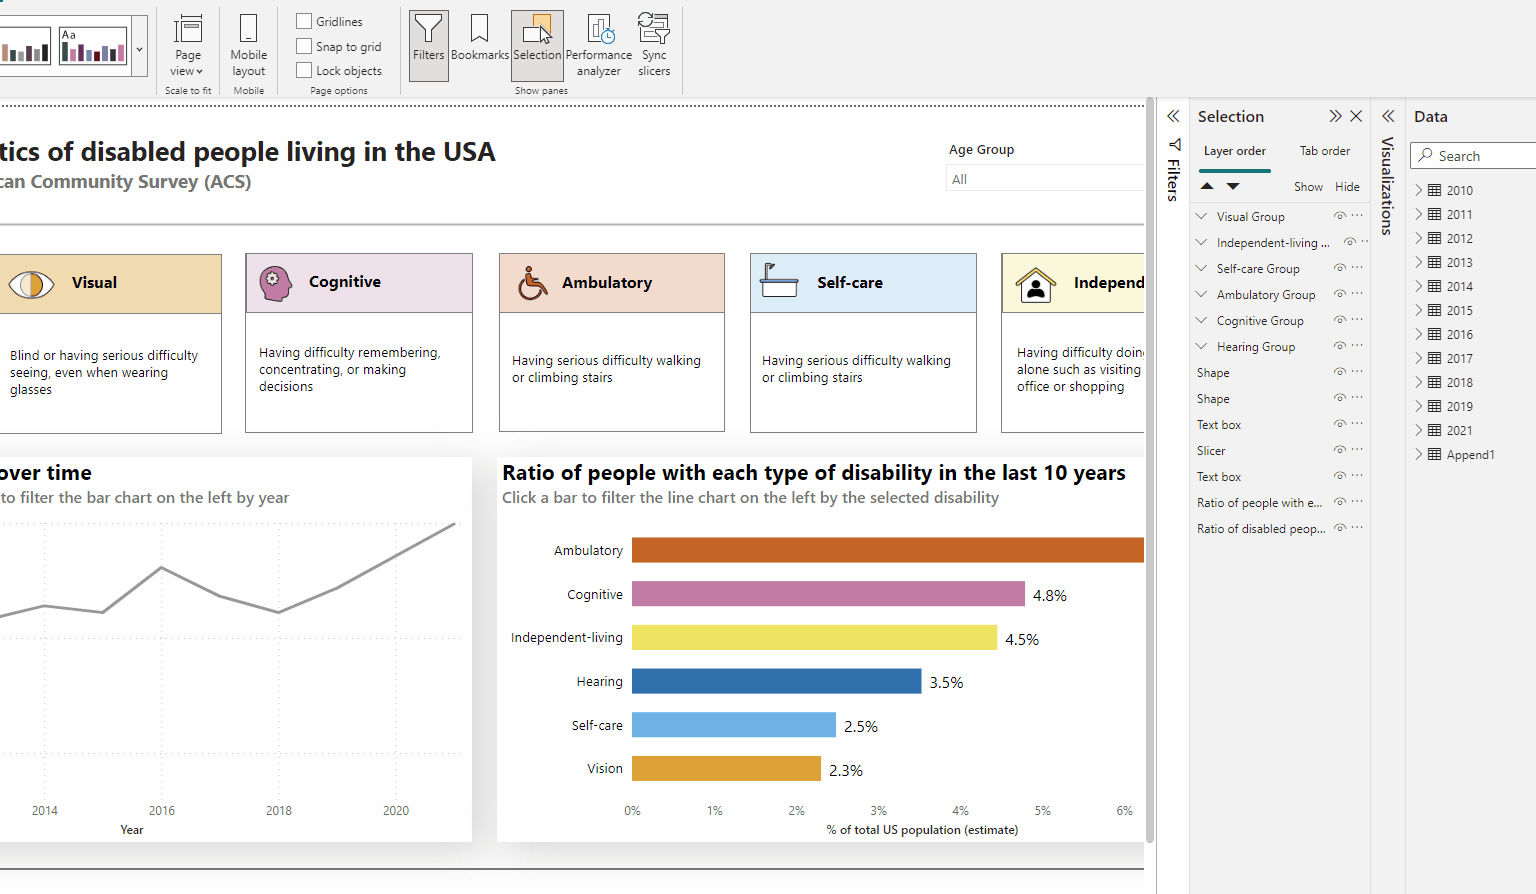 A GIF displaying Power BI's phone layout creation process for the dashboard about the disability characteristics of people living with disabilities in the USA. A person drags and drops elements onto the phone canvas to create the phone layout.